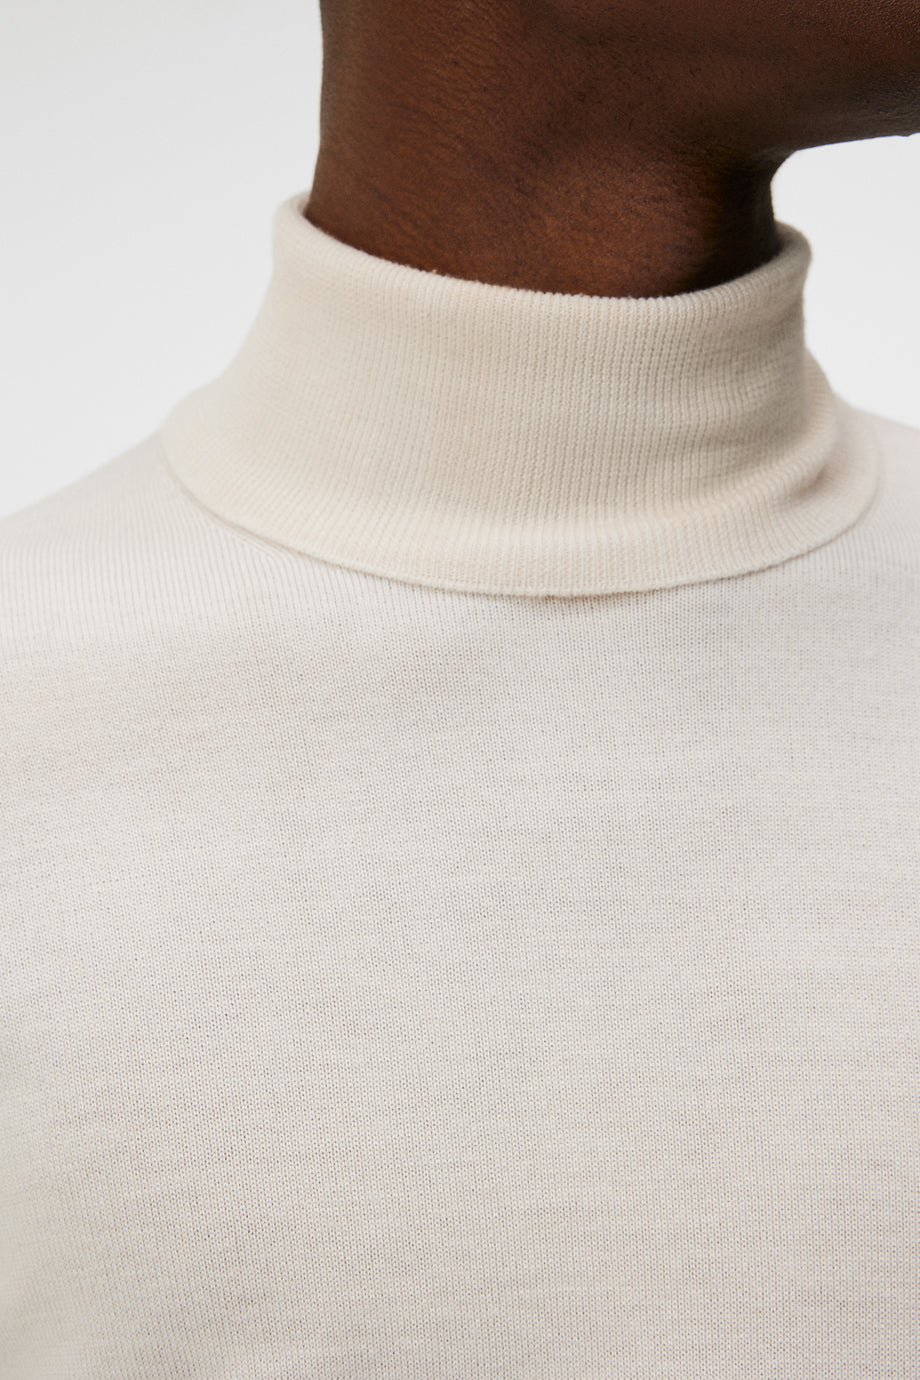 Lyd Merino Turtleneck Sweater / Forest Green